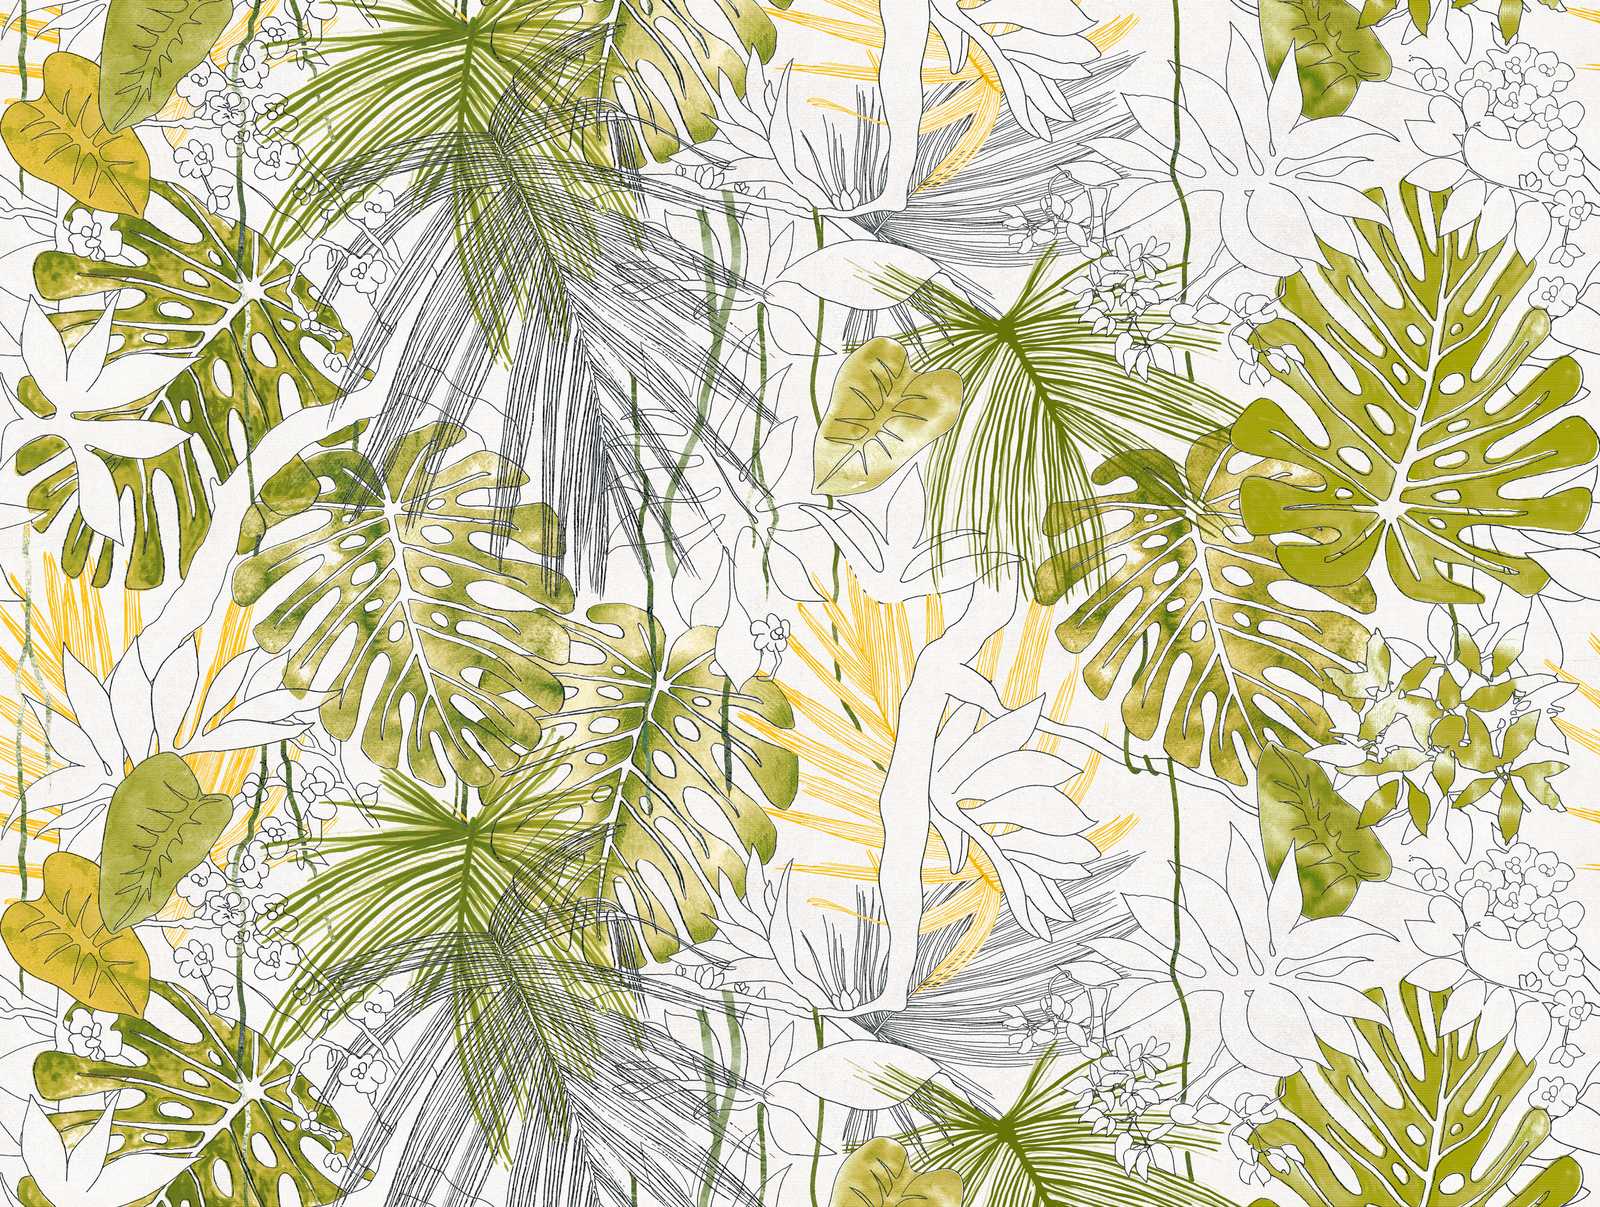             Wallpaper novelty - motif wallpaper leaves design in drawing style
        